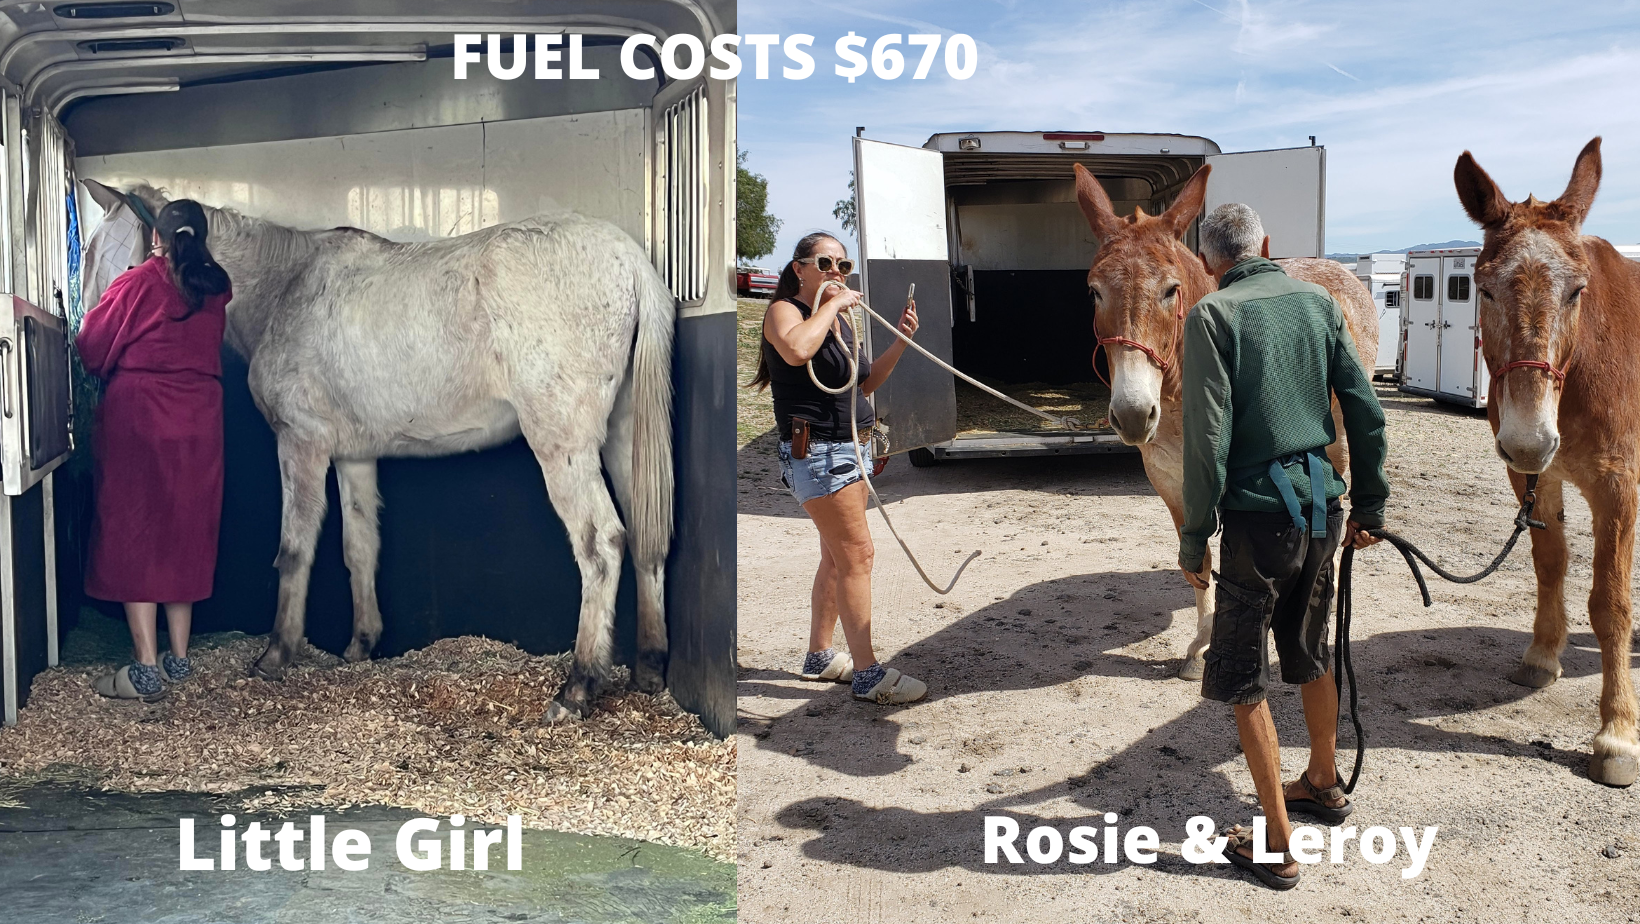 Fuel Cost for Hauling $670